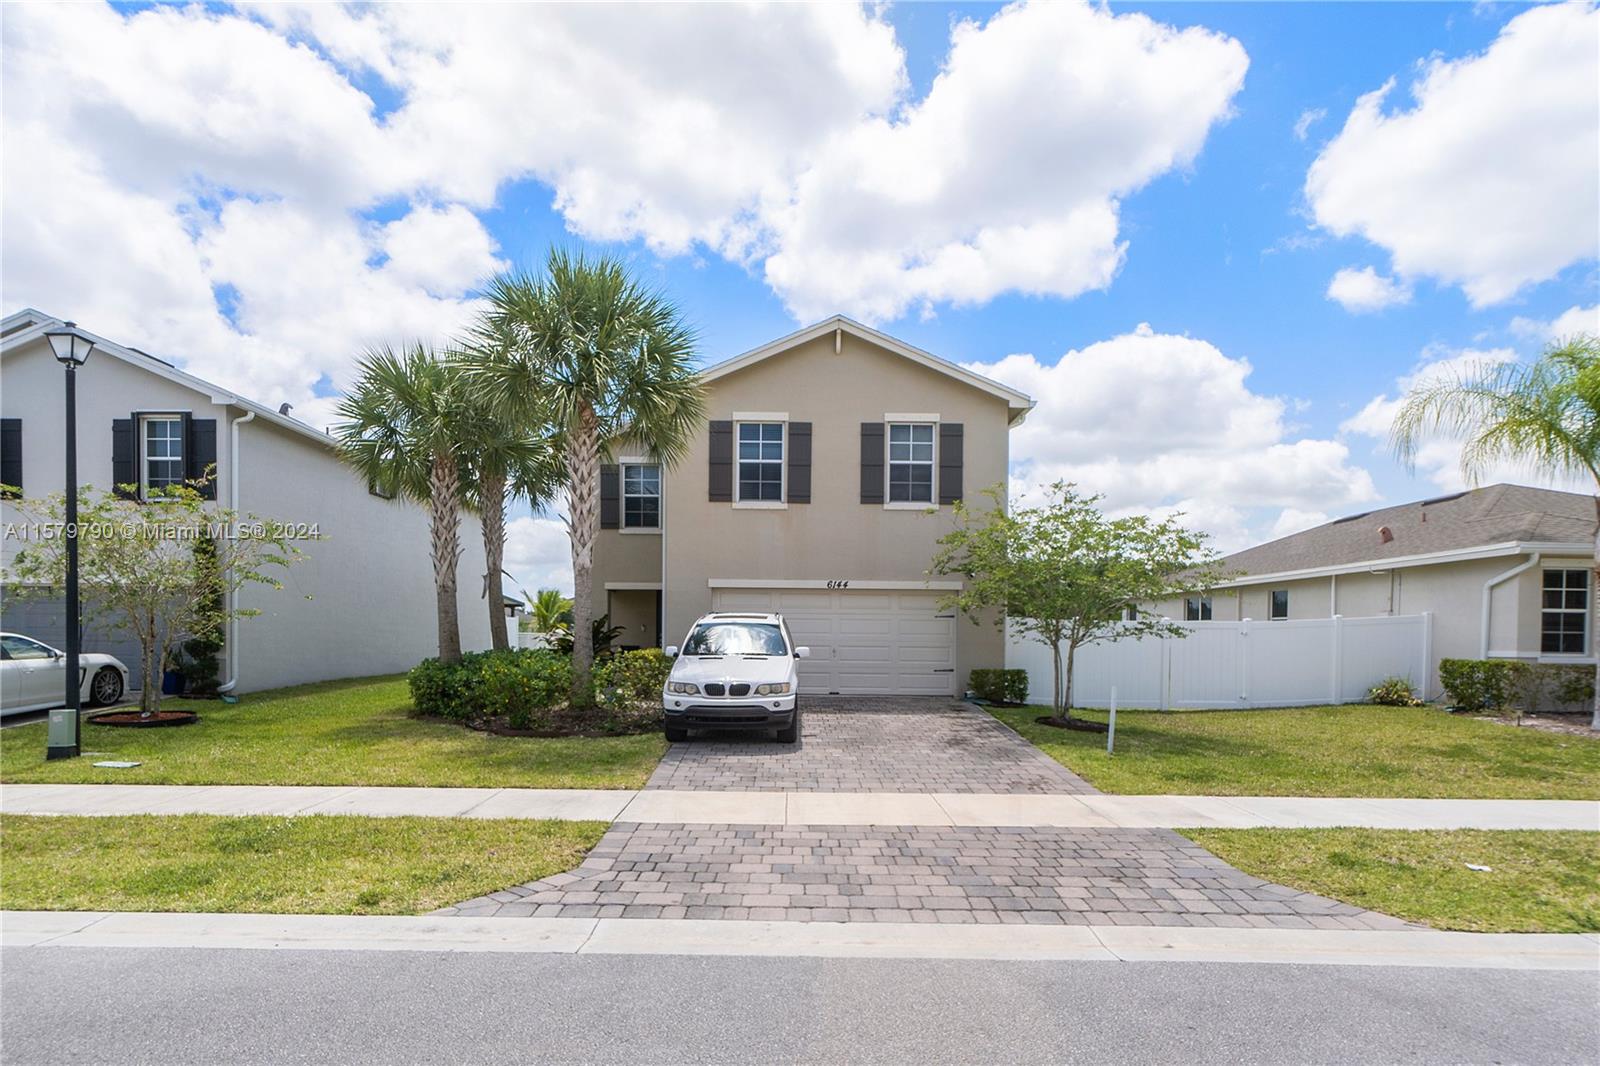 6144 Wildfire Way, West Palm Beach, Palm Beach County, Florida - 4 Bedrooms  
3 Bathrooms - 